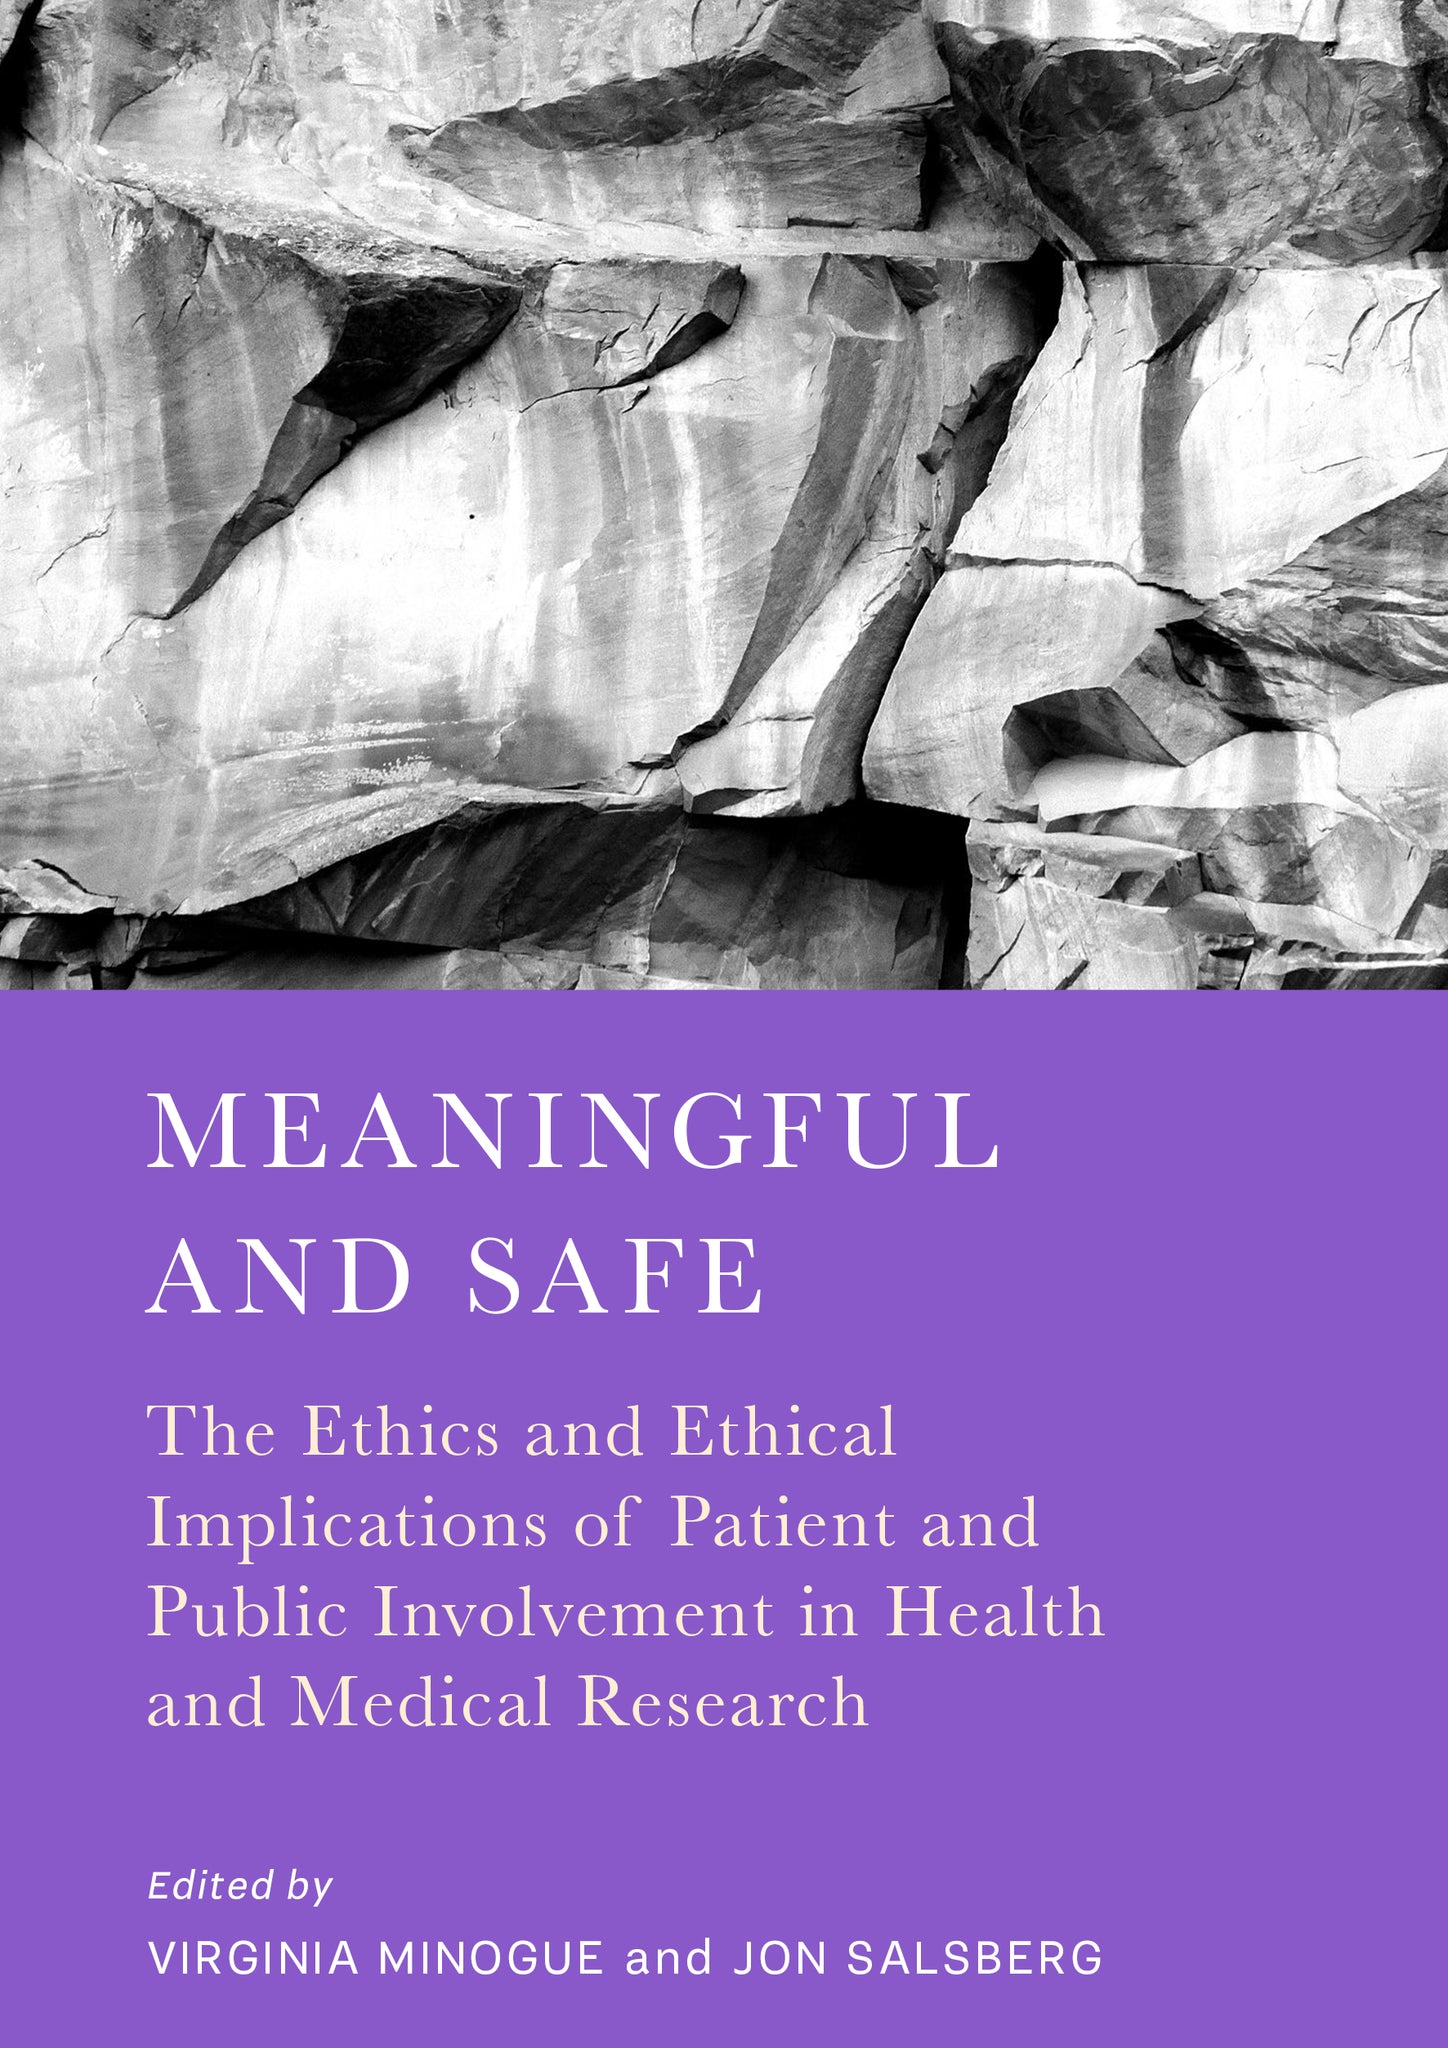 Meaningful and Safe: The Ethics and Ethical Implications of Patient and Public Involvement in Health and Medical Research